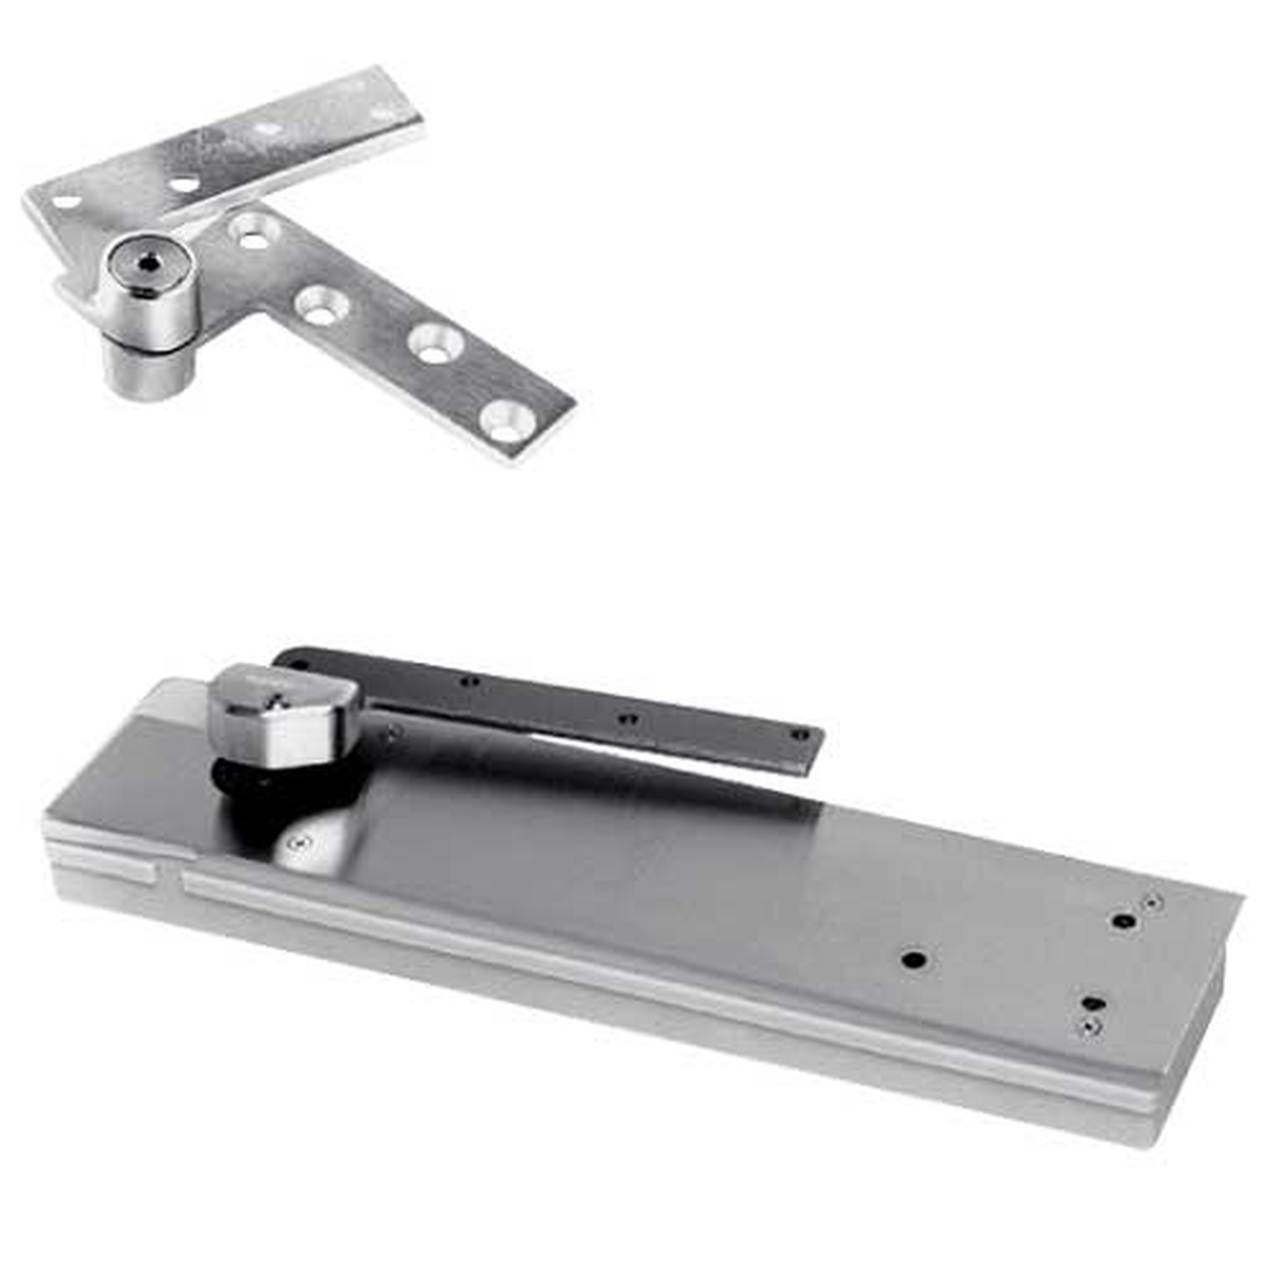 FHM5103NBC-LCC-LH-626 Rixson HM51 Series 3/4" Offset Hung Shallow Depth Floor Closers in Satin Chrome Finish